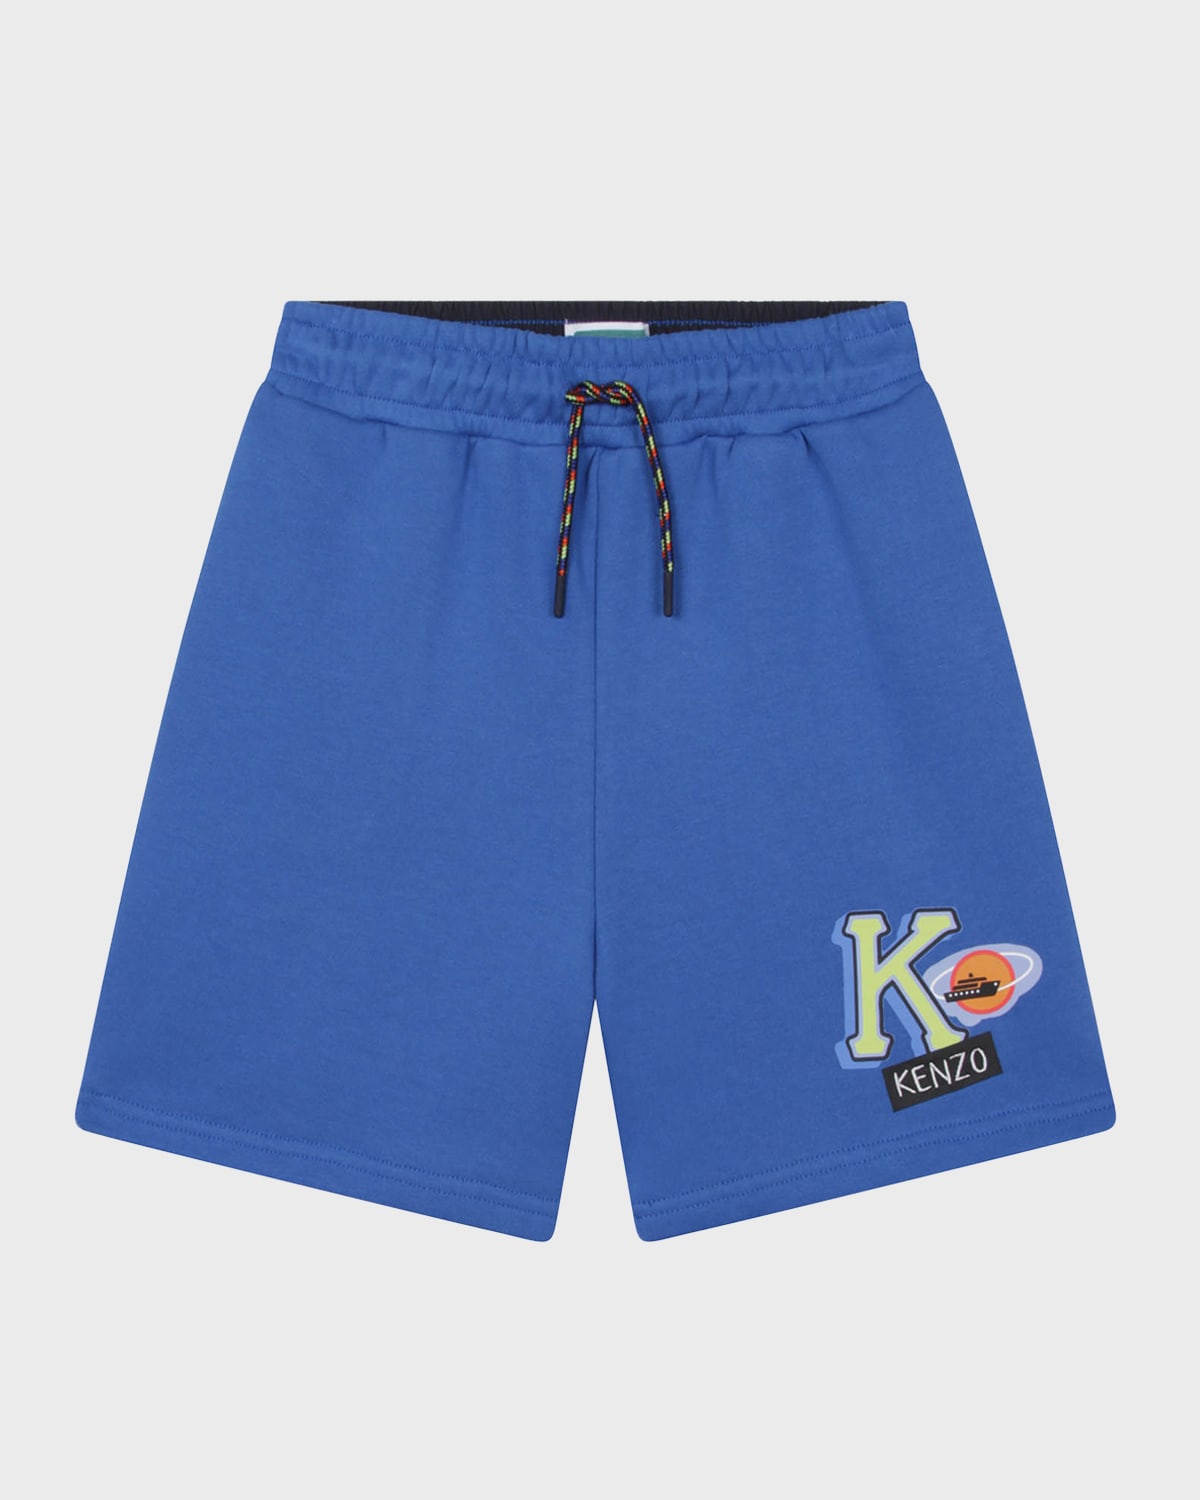 KENZO BOY'S EMBROIDERED COMBO SHORTS